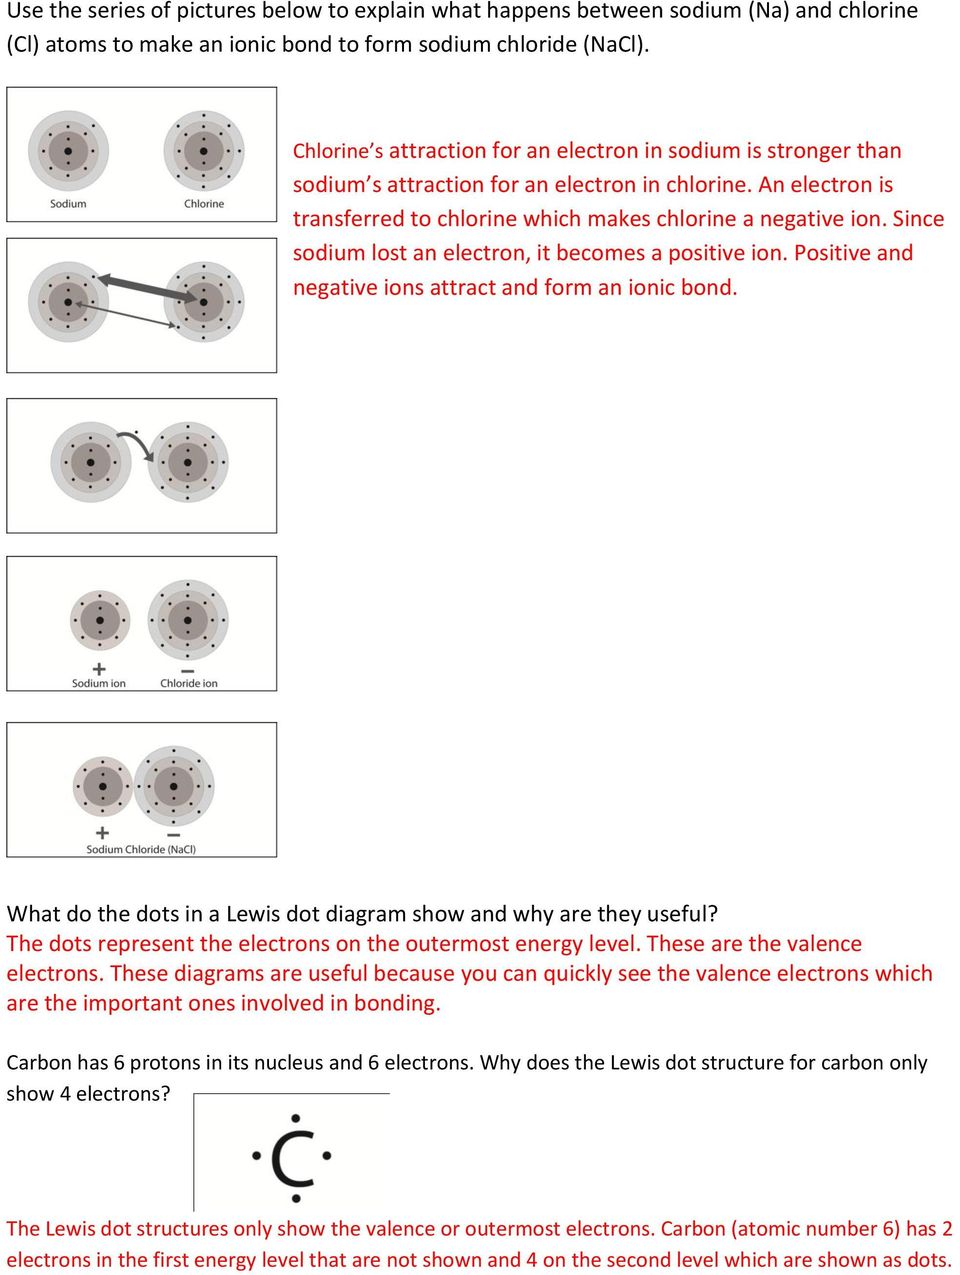 Since sodium lost an electron, it becomes a positive ion. Positive and negative ions attract and form an ionic bond. What do the dots in a Lewis dot diagram show and why are they useful?